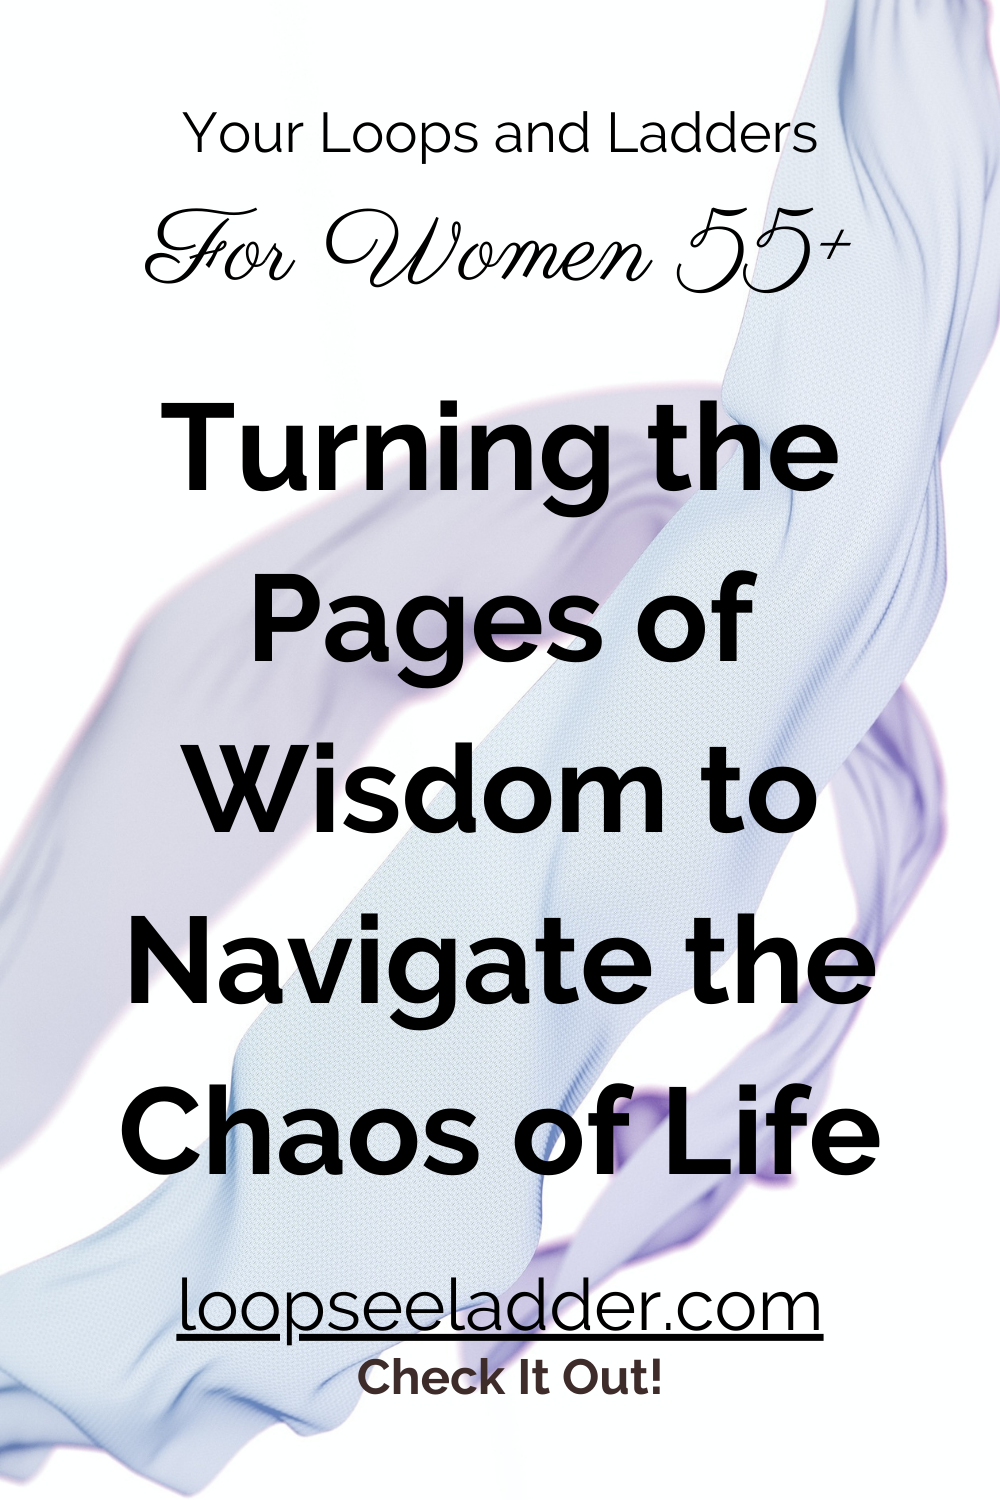 Turning the Pages of Wisdom: Navigating the Beautiful Chaos of Life at 55+